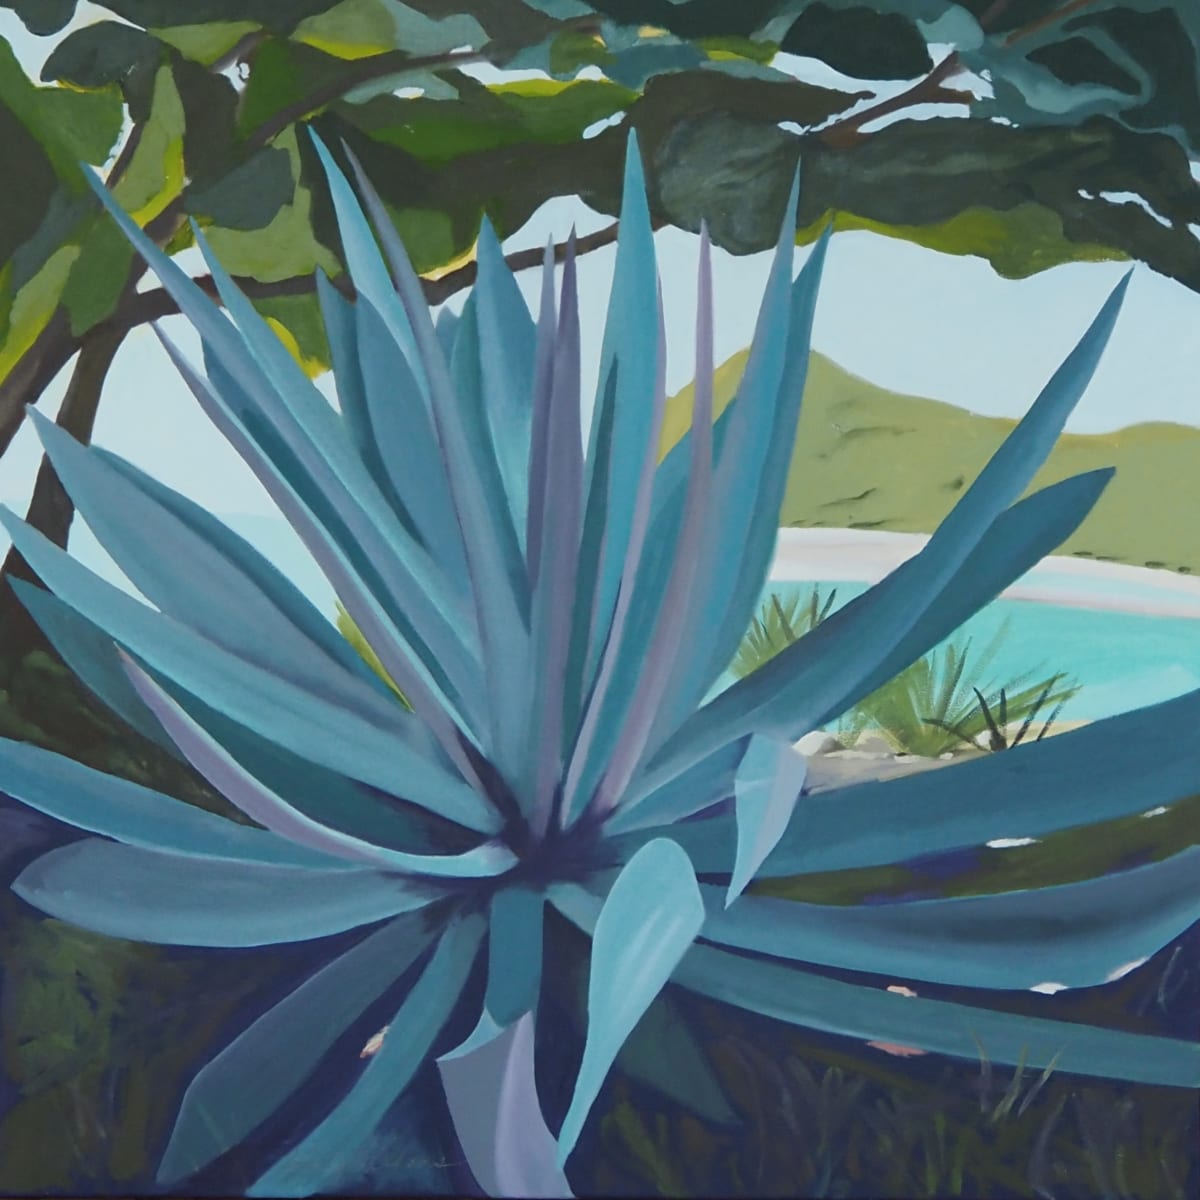 Well Aloe There! by Kimberly Adams  Image: Inspired by my visit to St. John, USVI in February 2023 while staying at my sister's place - Coral Cove